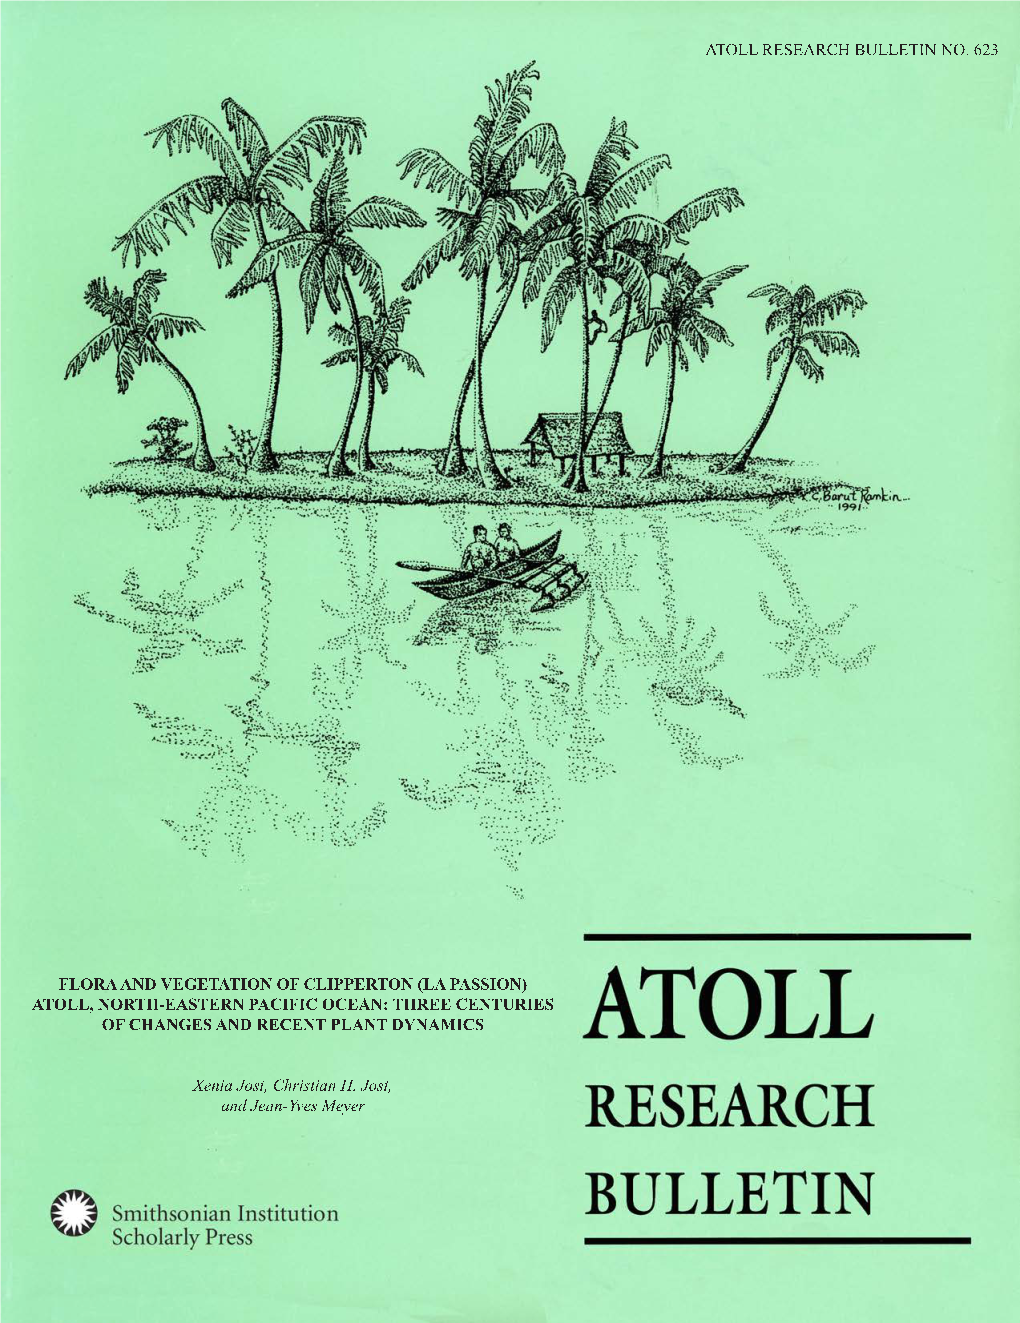 Flora and Vegetation of Clipperton (La Passion) Atoll, North-Eastern Pacific Ocean: Three Centuries